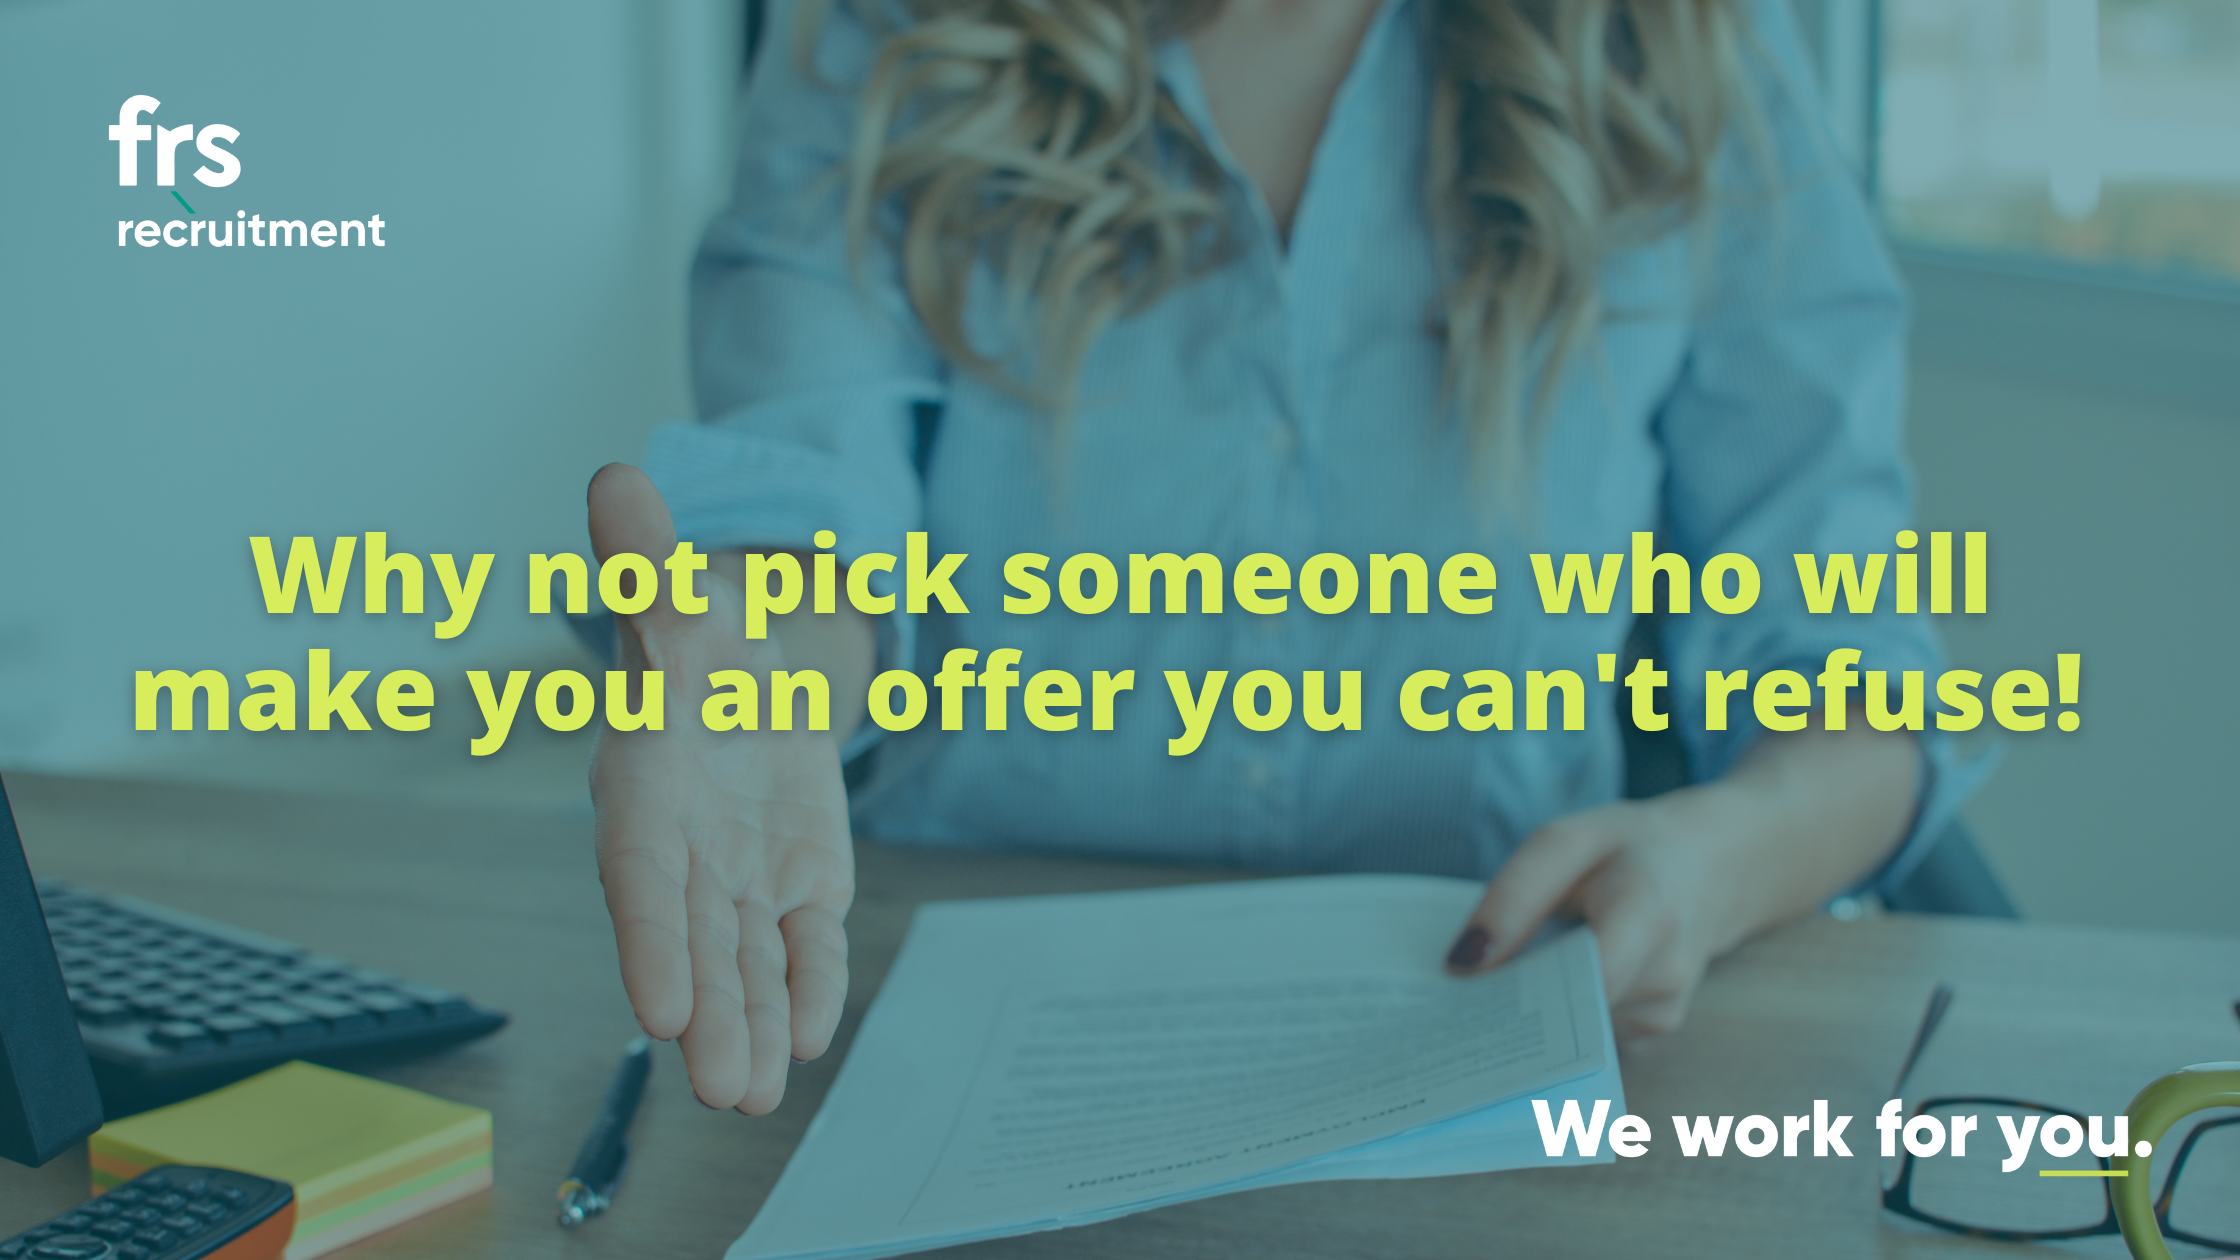 Why should you choose a recruiter?